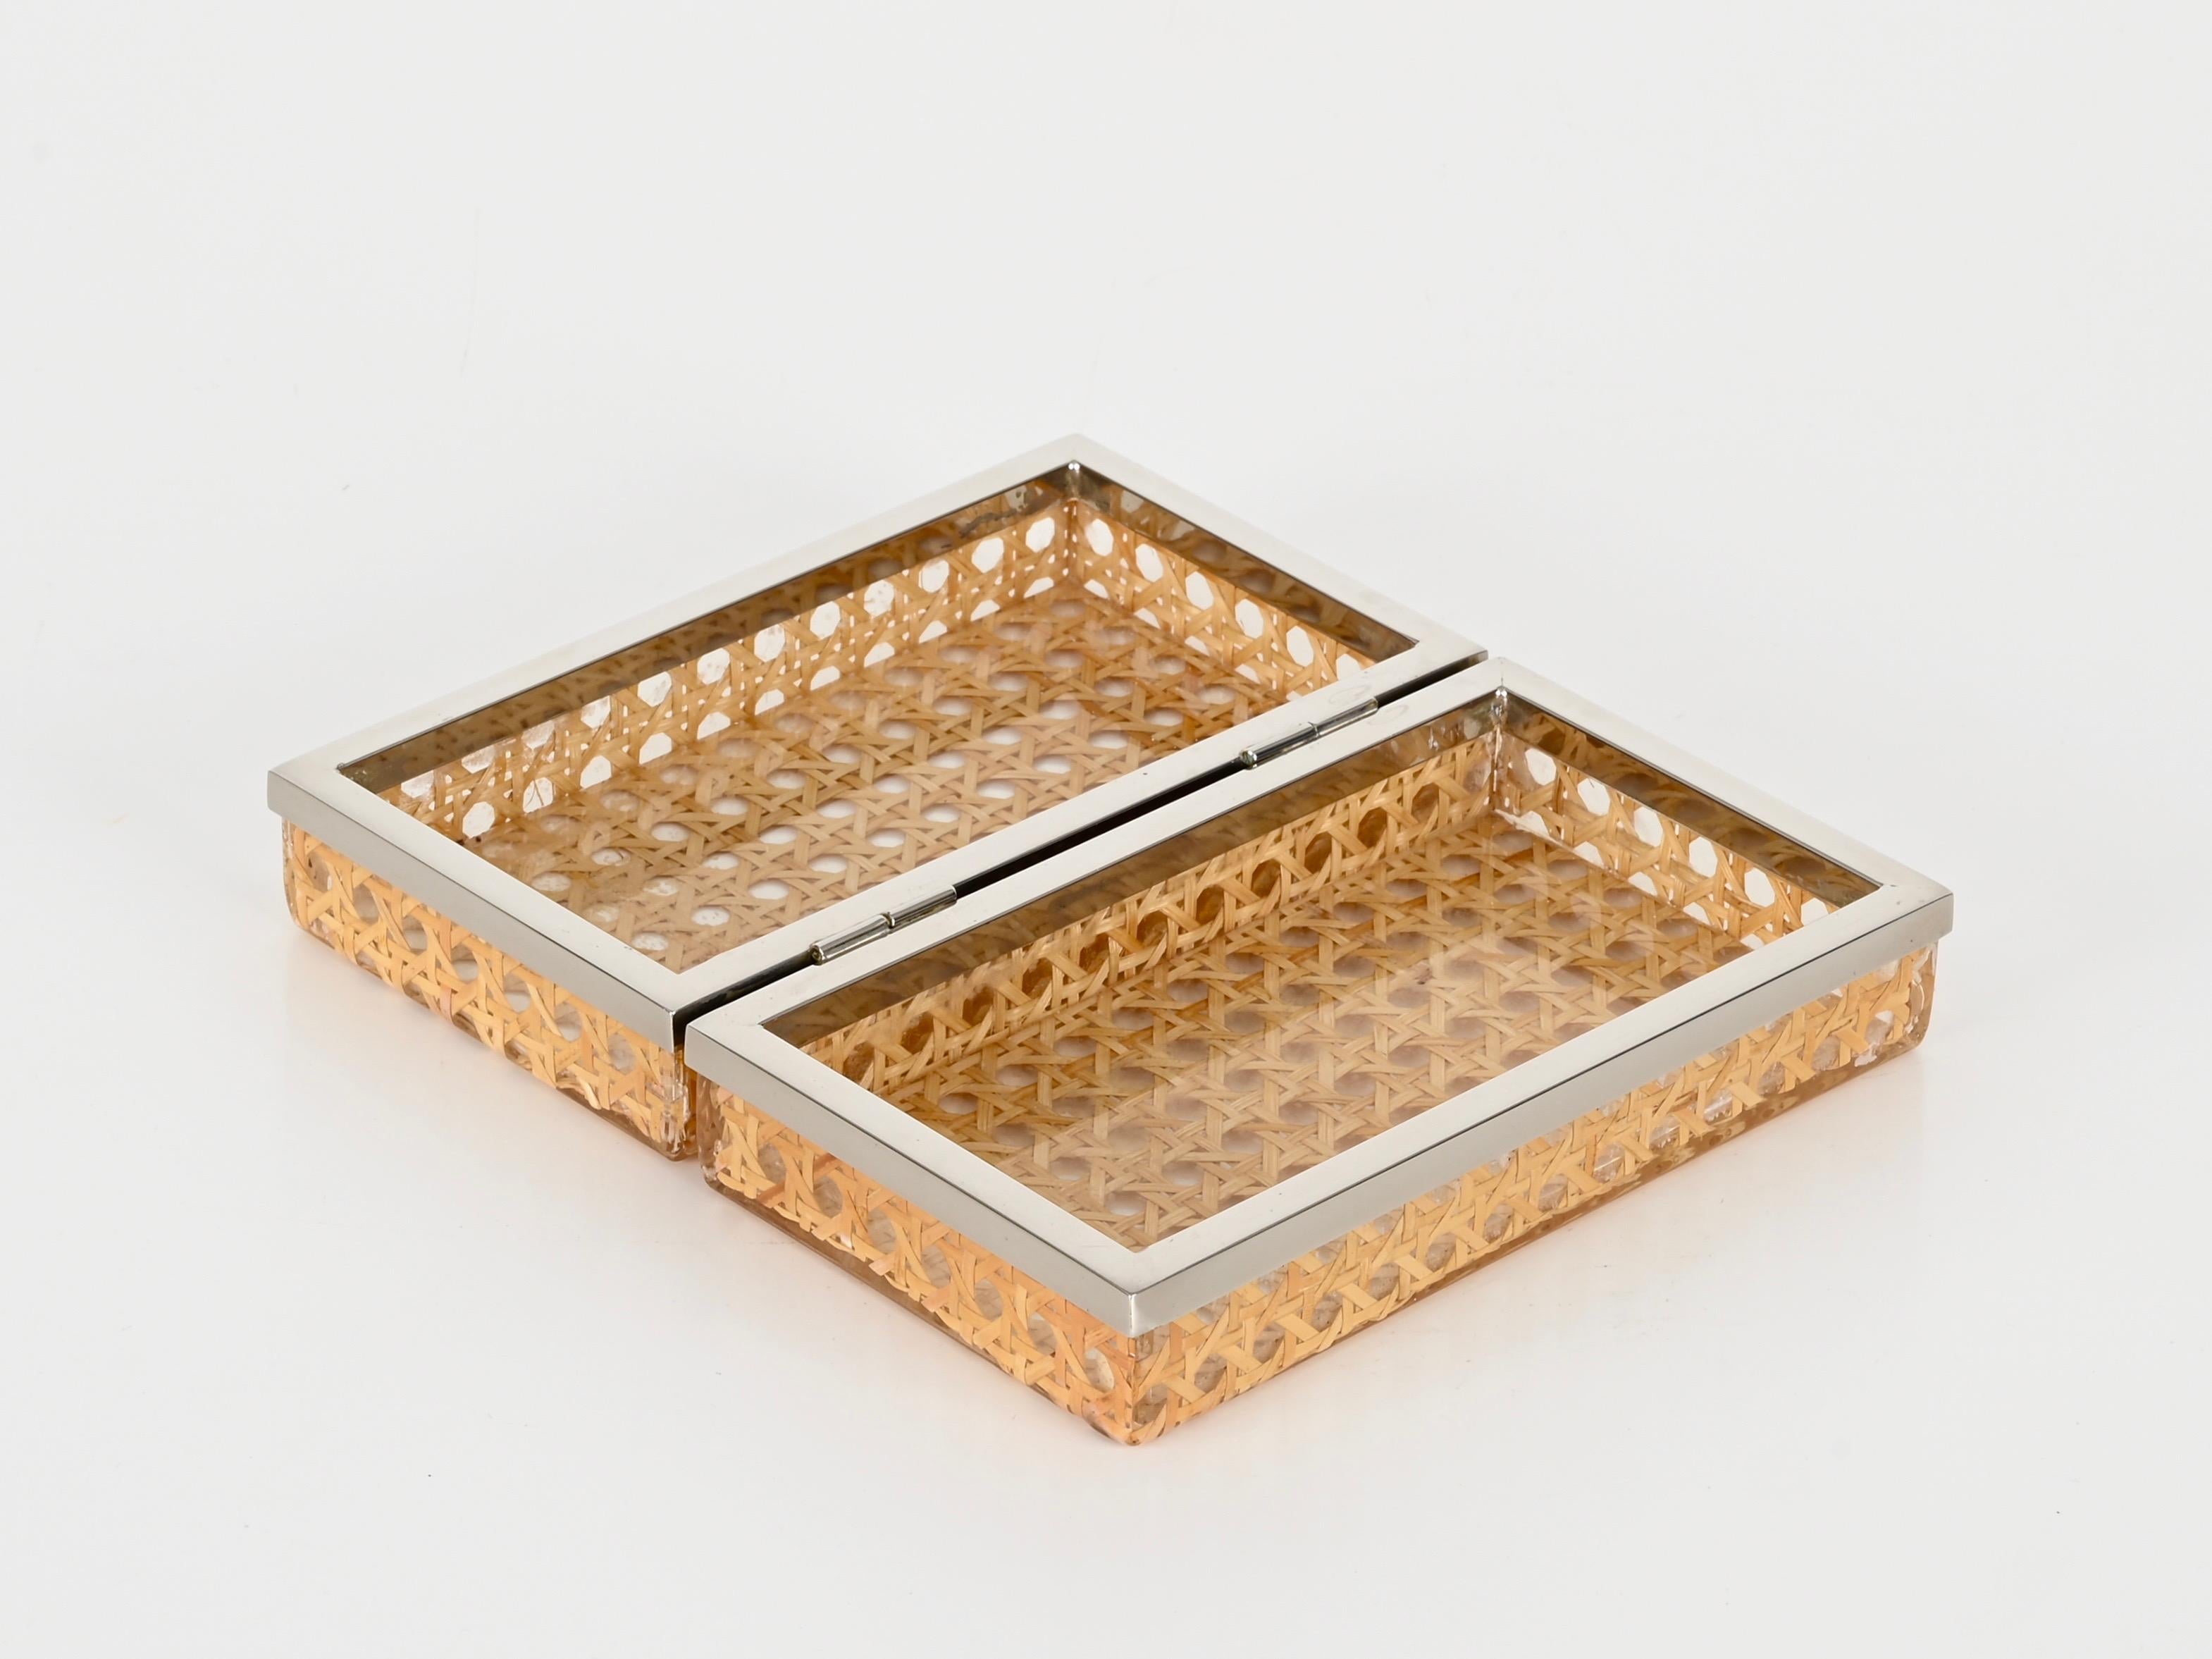 Midcentury Chrome, Lucite and Vienna Straw Italian Box 1970s Christian Dior For Sale 3